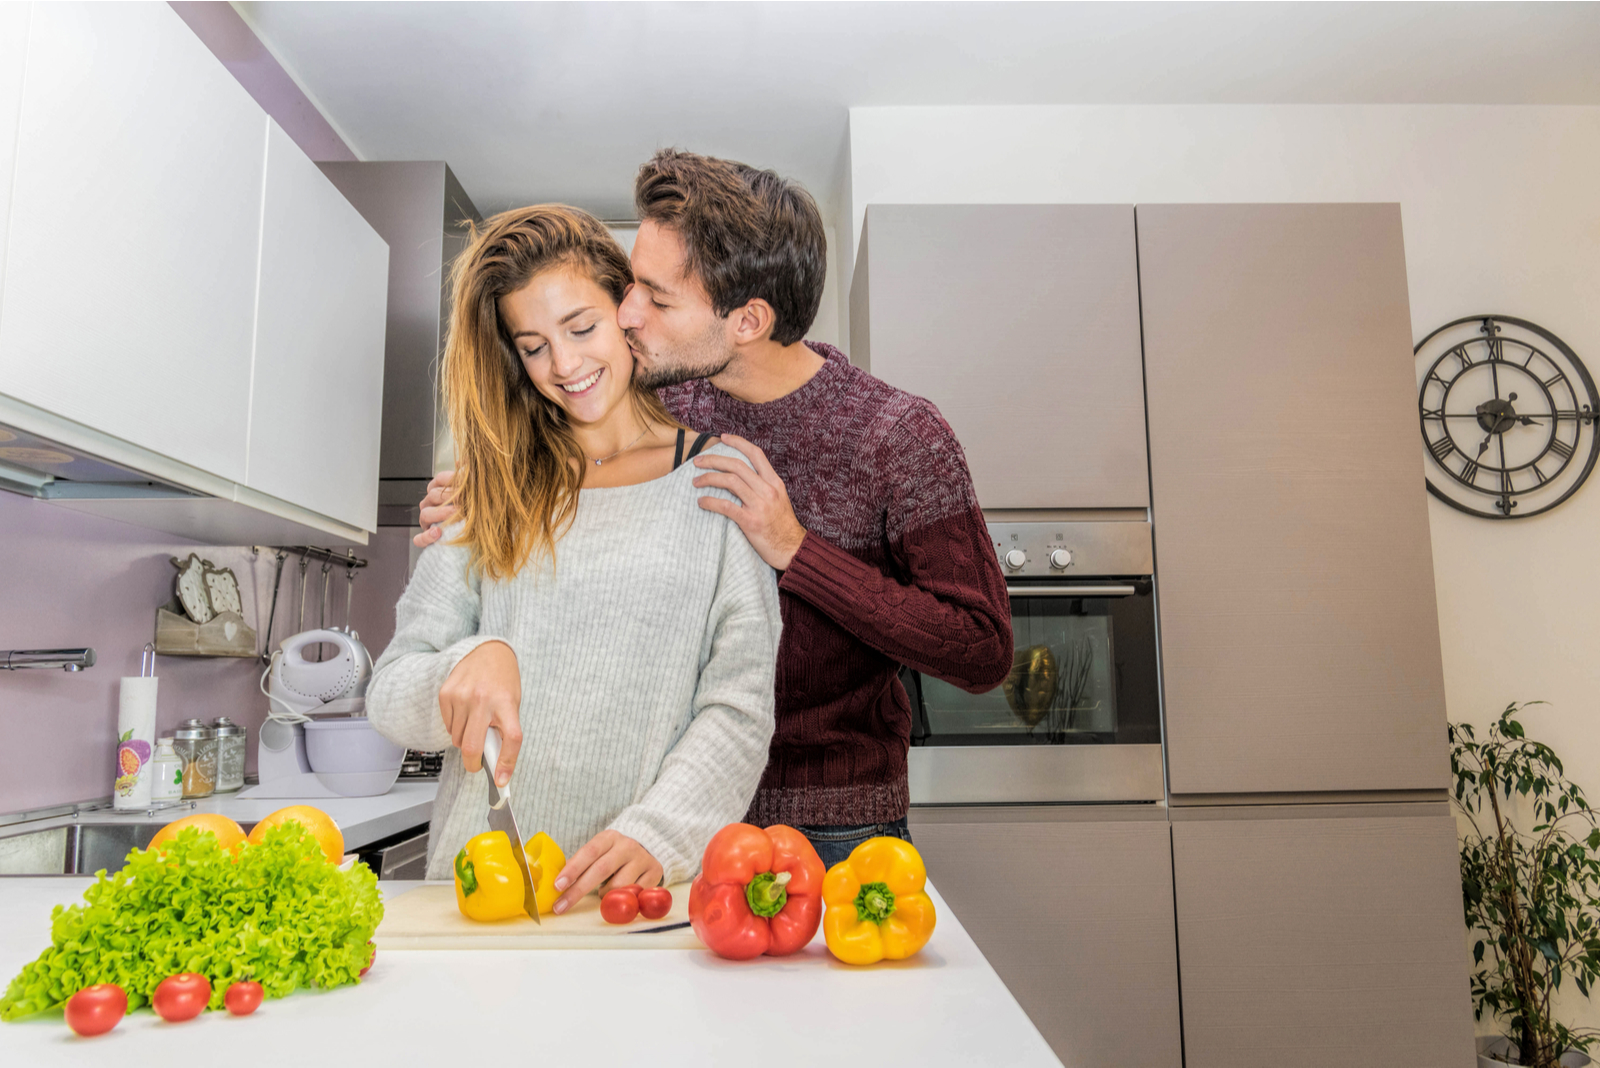 smiling woman cuts vegetables in the kitchen a man kisses her on the cheek